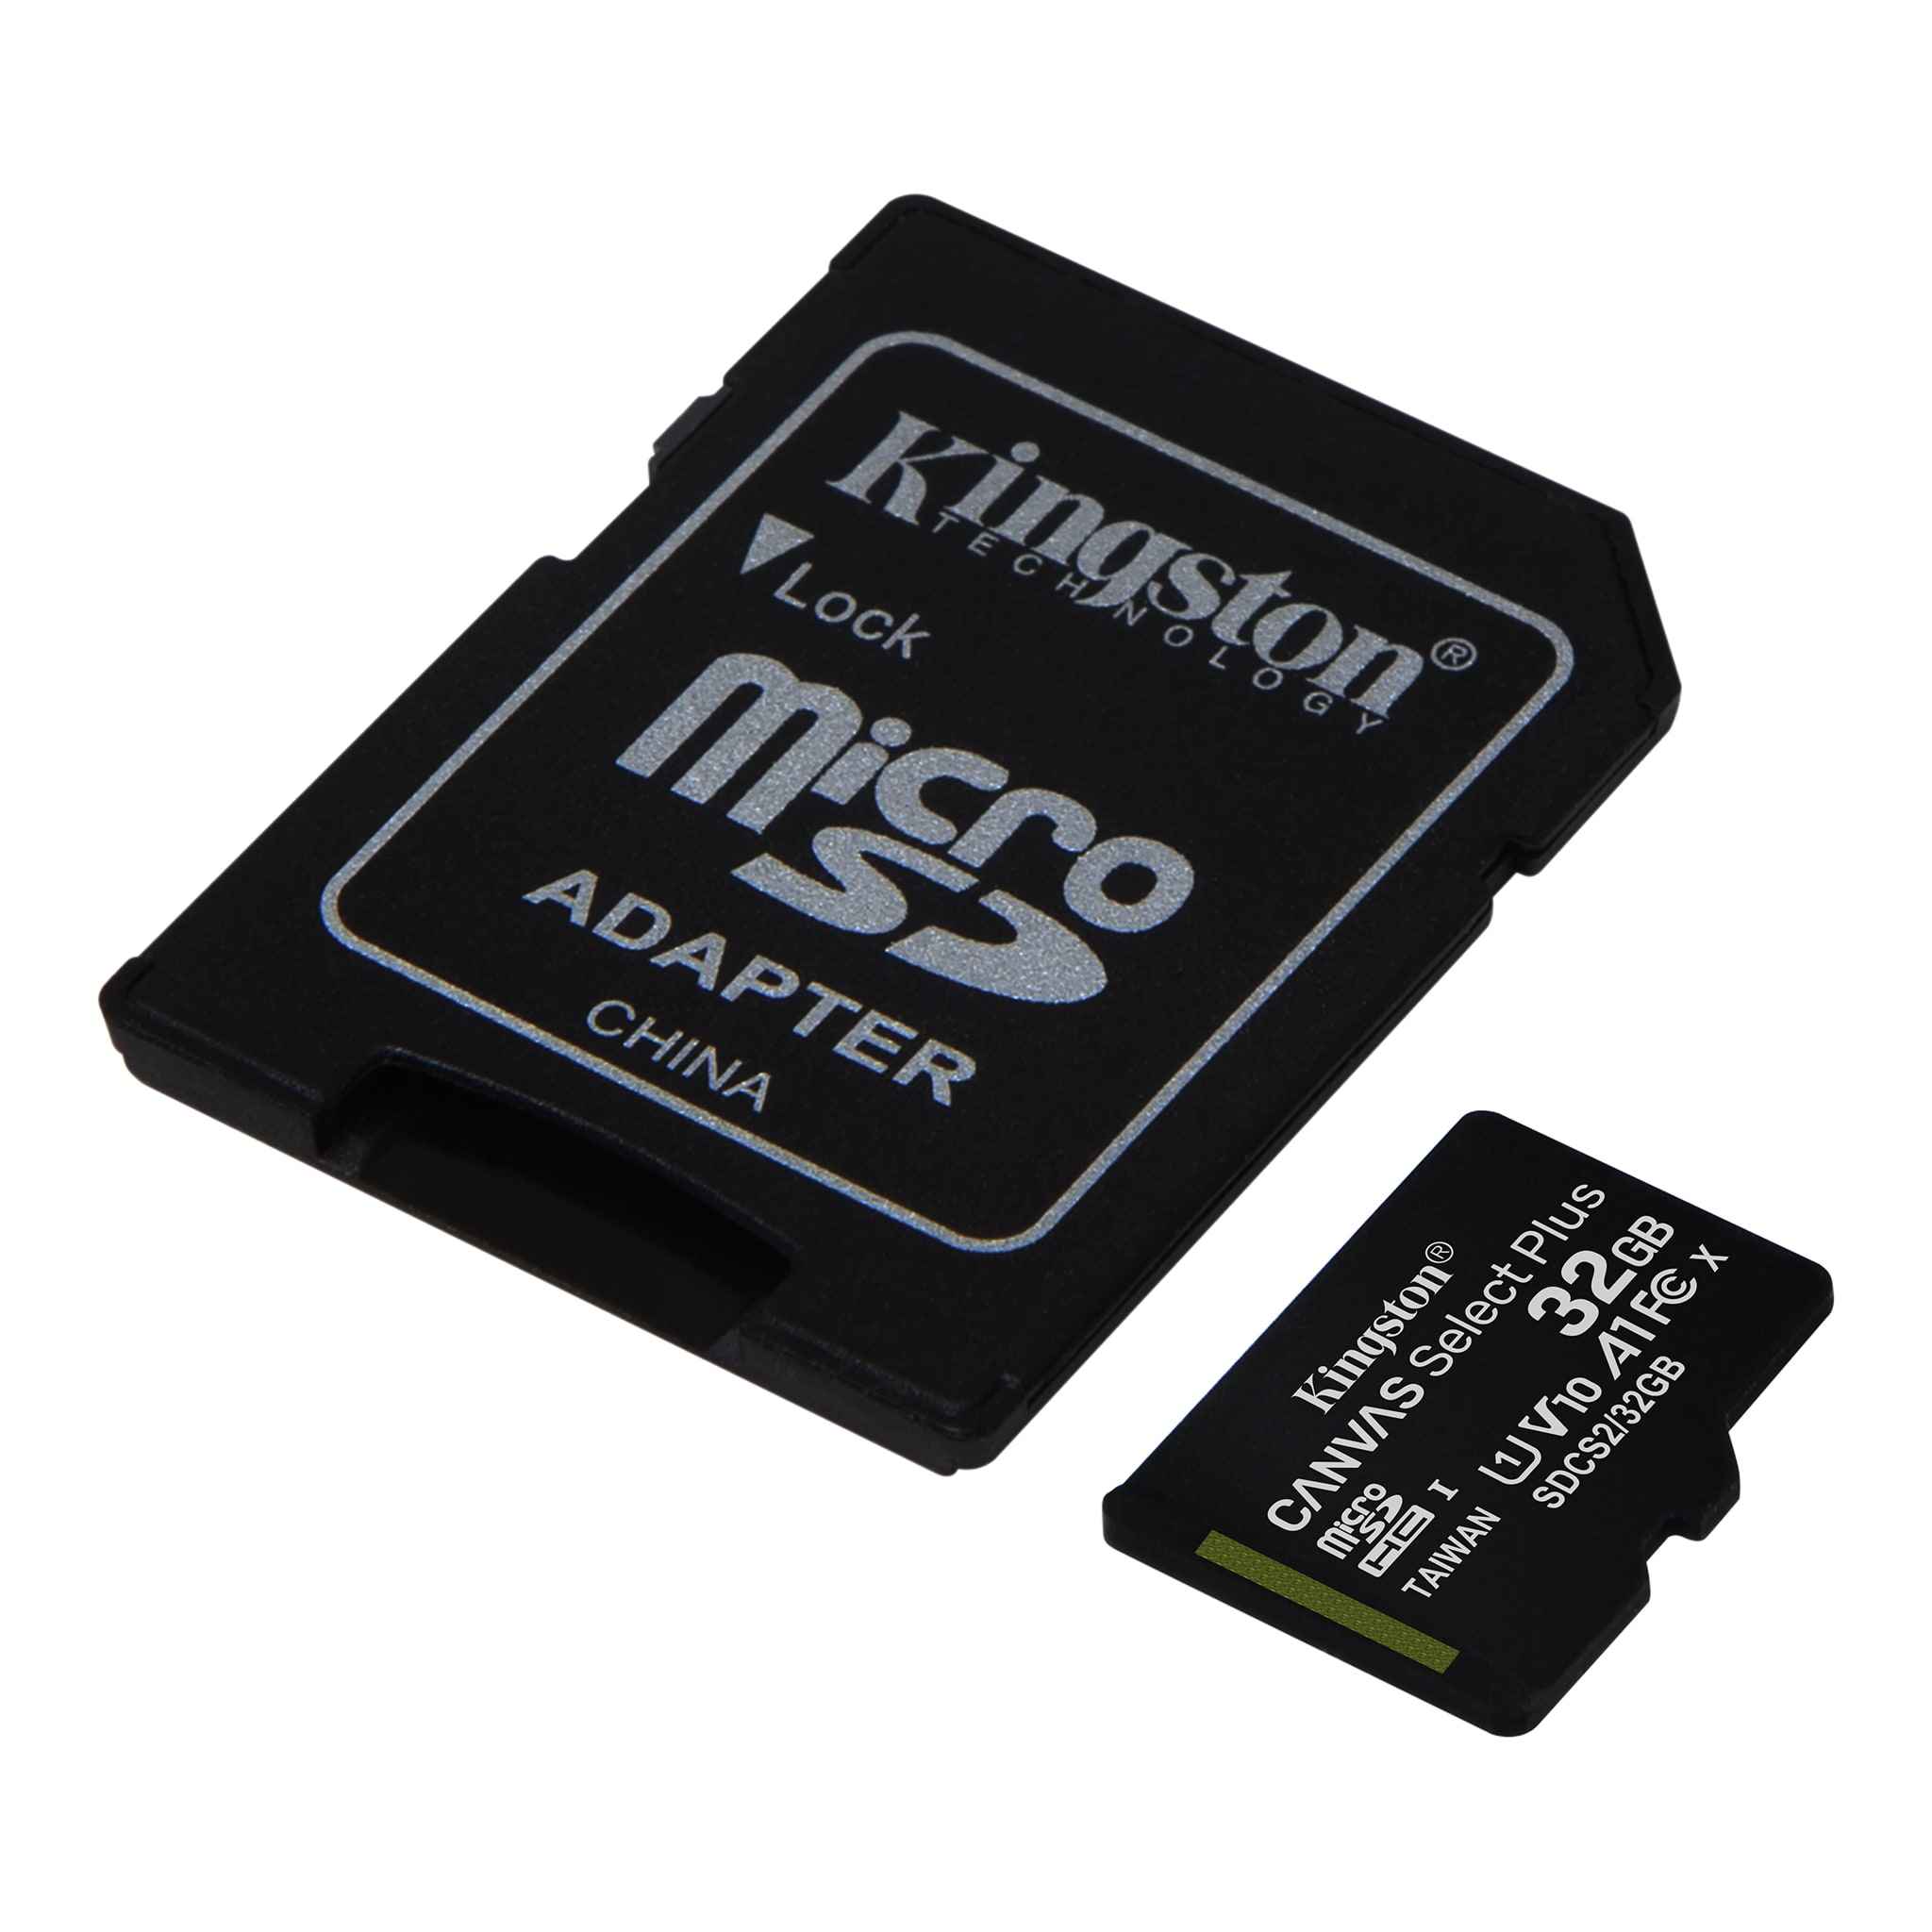 100MBs Works with Kingston Kingston 512GB Acer S56 MicroSDXC Canvas Select Plus Card Verified by SanFlash. 